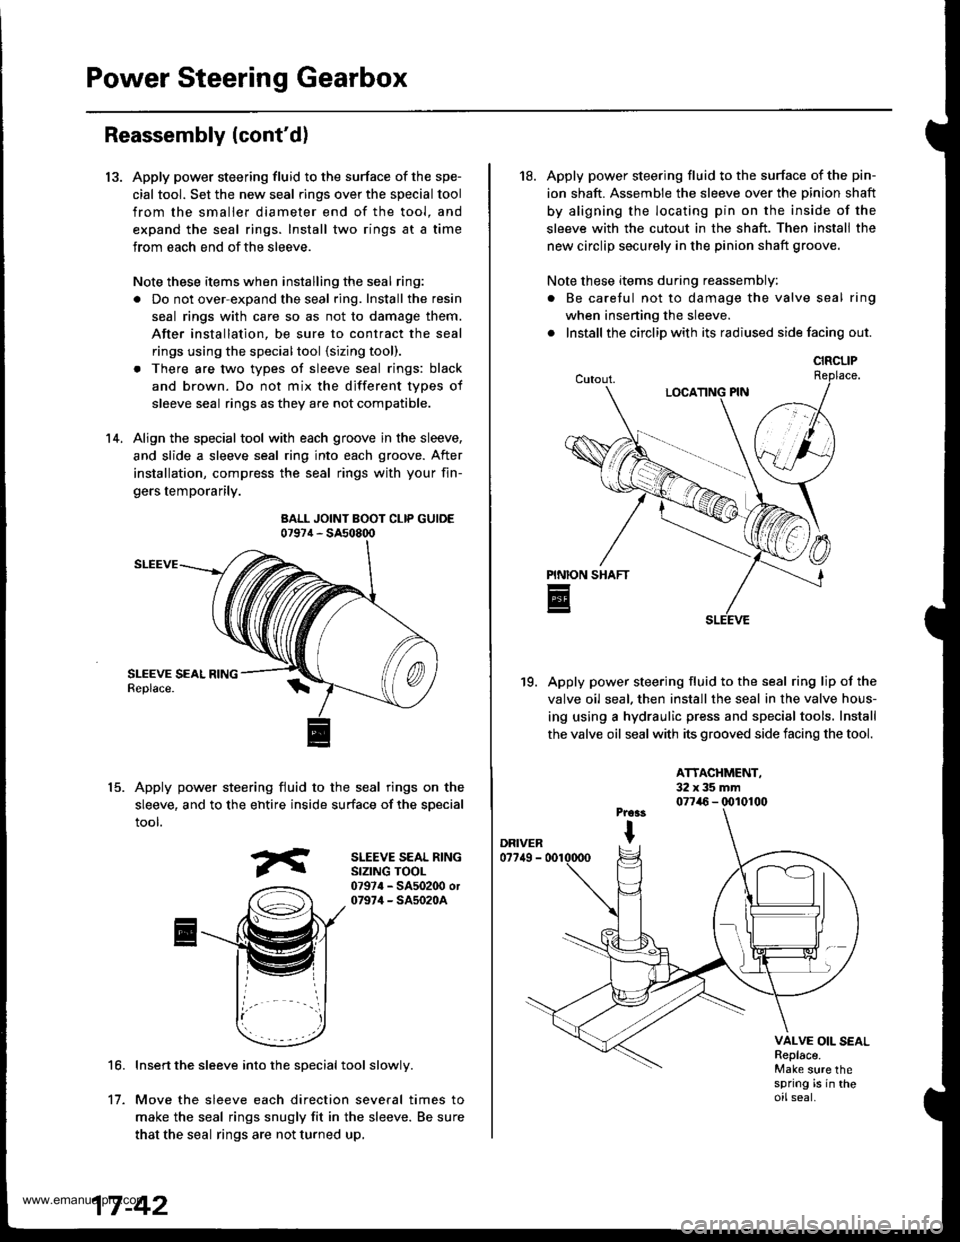 HONDA CR-V 1997 RD1-RD3 / 1.G Workshop Manual 
Power Steering Gearbox
13.
Reassembly (contd)
Apply power steering fluid to the surface of the spe-
cial tool. Set the new seal rings over the special tool
from the smaller diameter end of the tool.